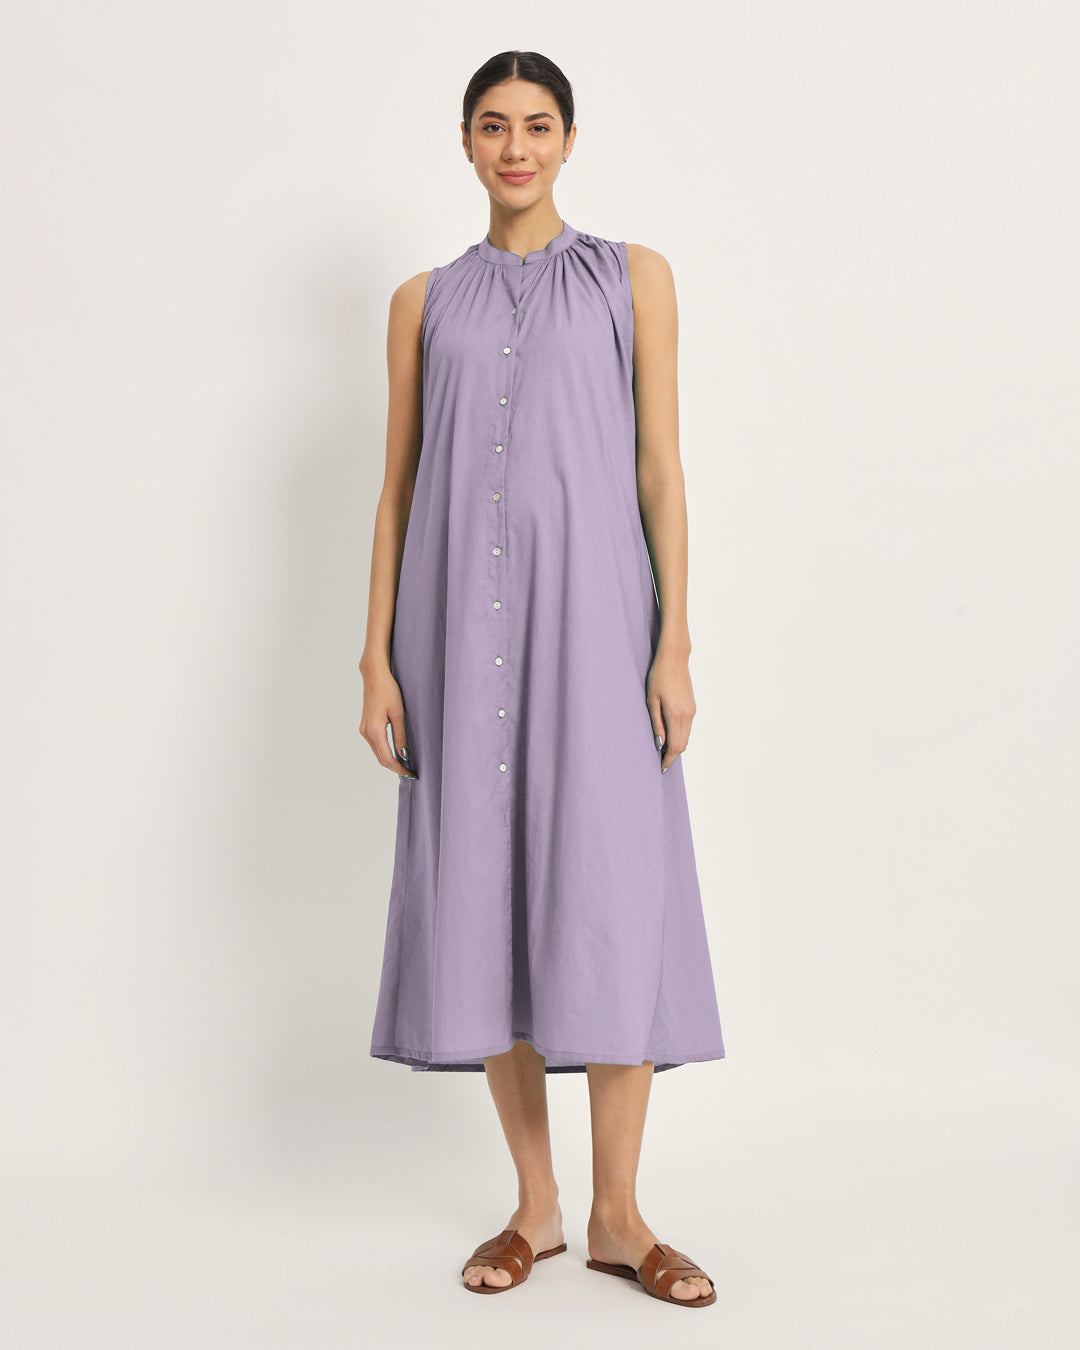 Combo: Iris Pink & Lilac Mommy Must-Haves Maternity & Nursing Dress